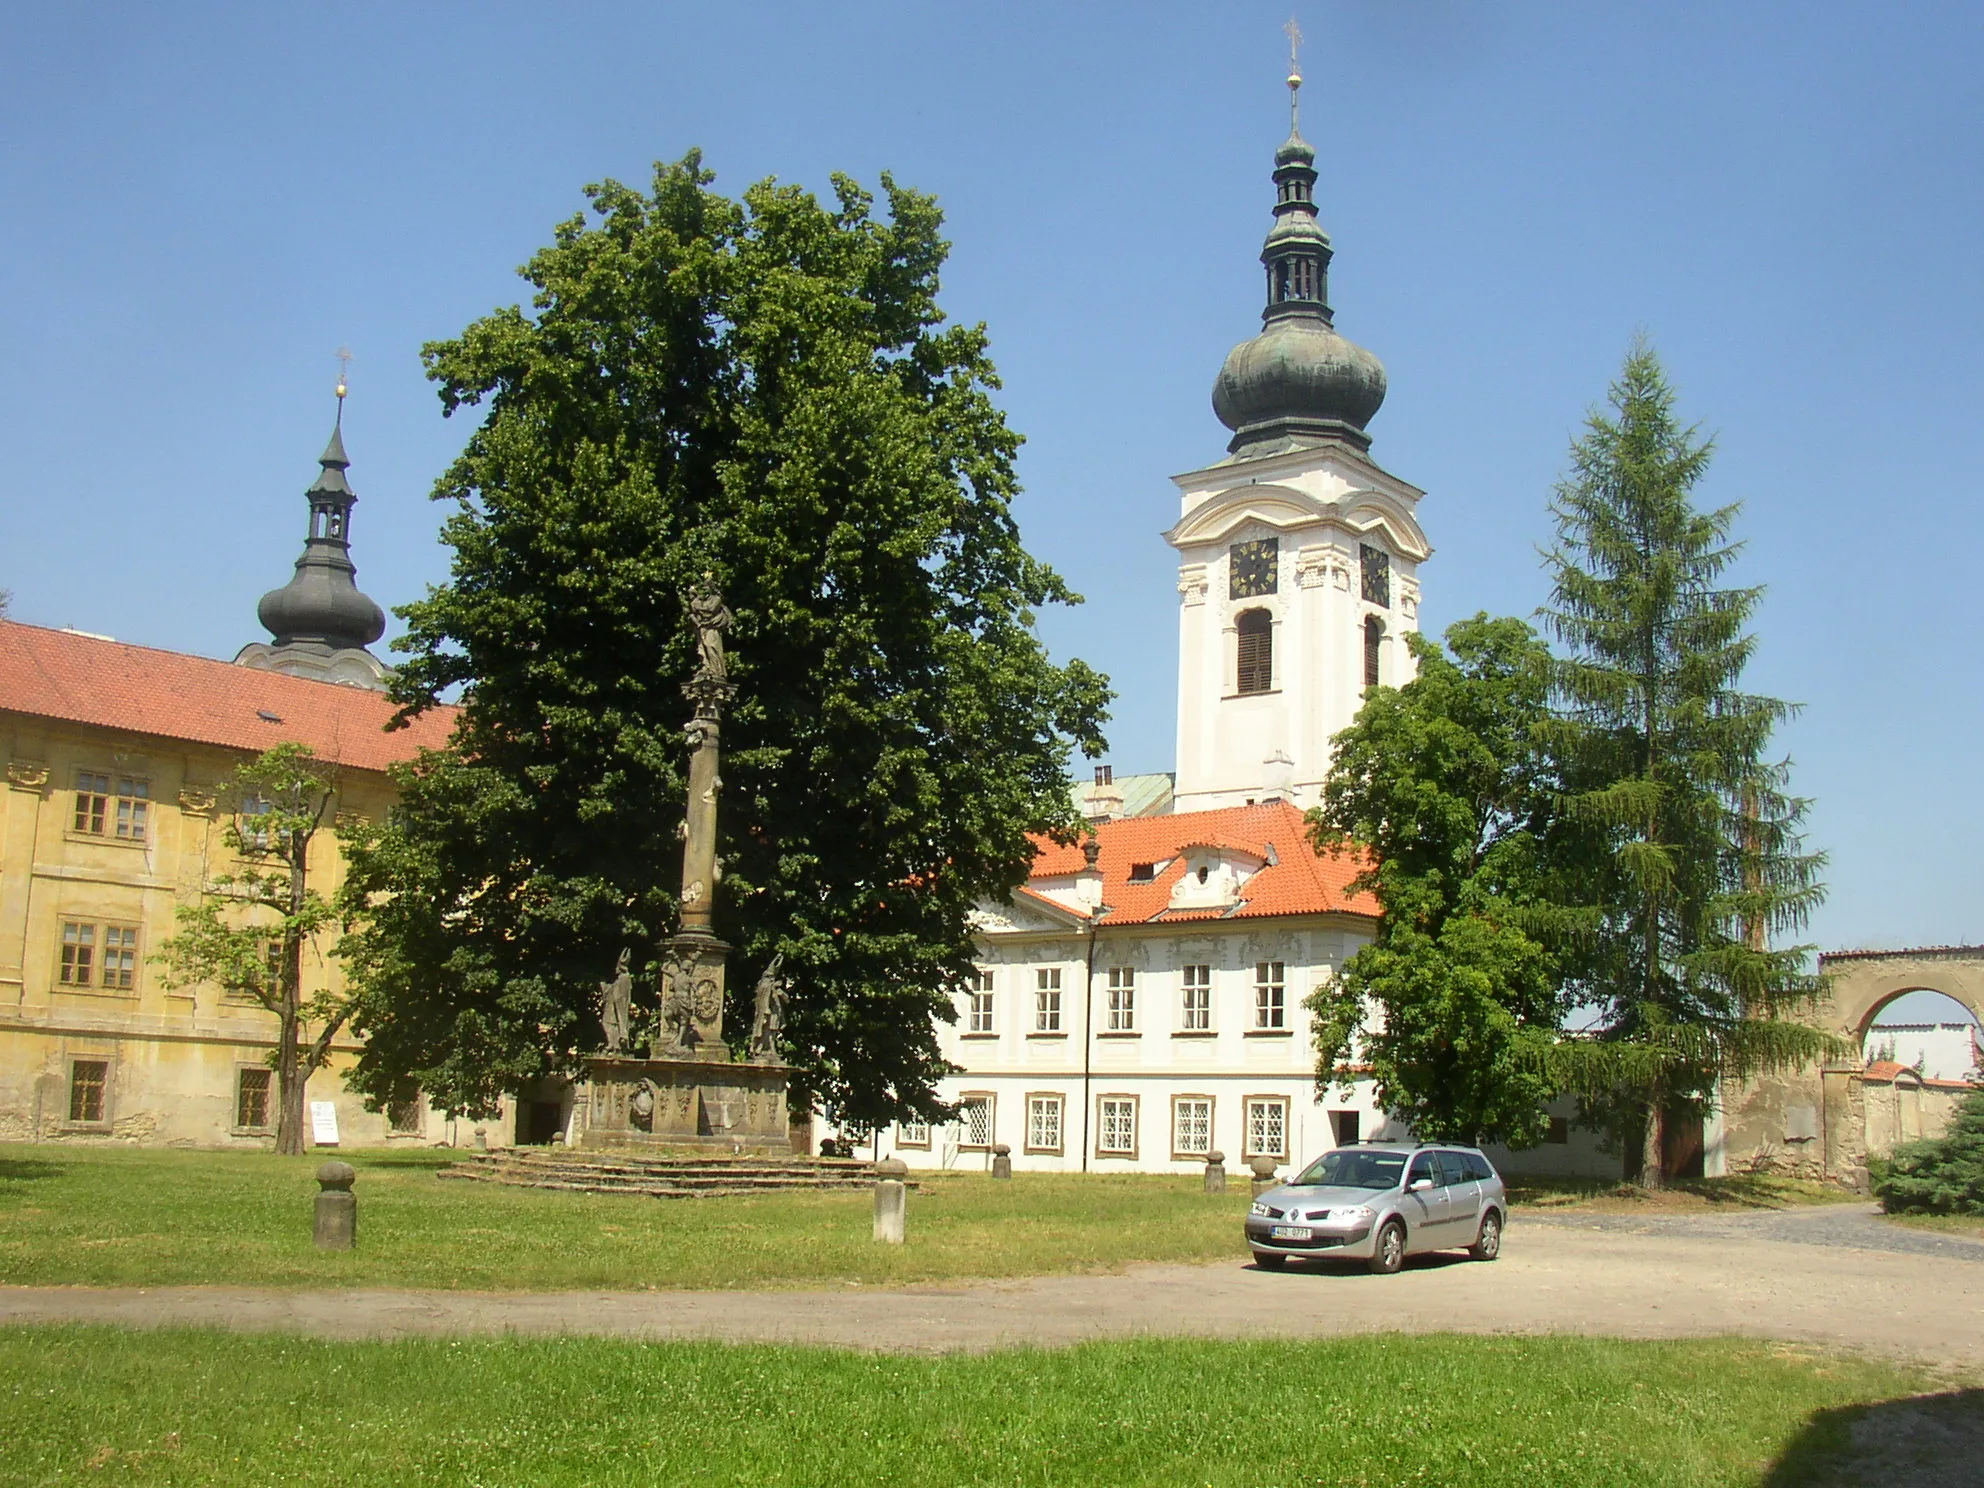 Photo showing: First courtyard of female Premonstratensian convent in Doksany, Litoměřice District, Czech Republic. A view from the southeast, in the middle Marian plague column (1684), in the left building of prelature (1692) separating the first courtyard from the second one, in the right building of provisory (1725-30) with eastern tower (1718) of church of the Nativity of the Virgin Mary in the background.